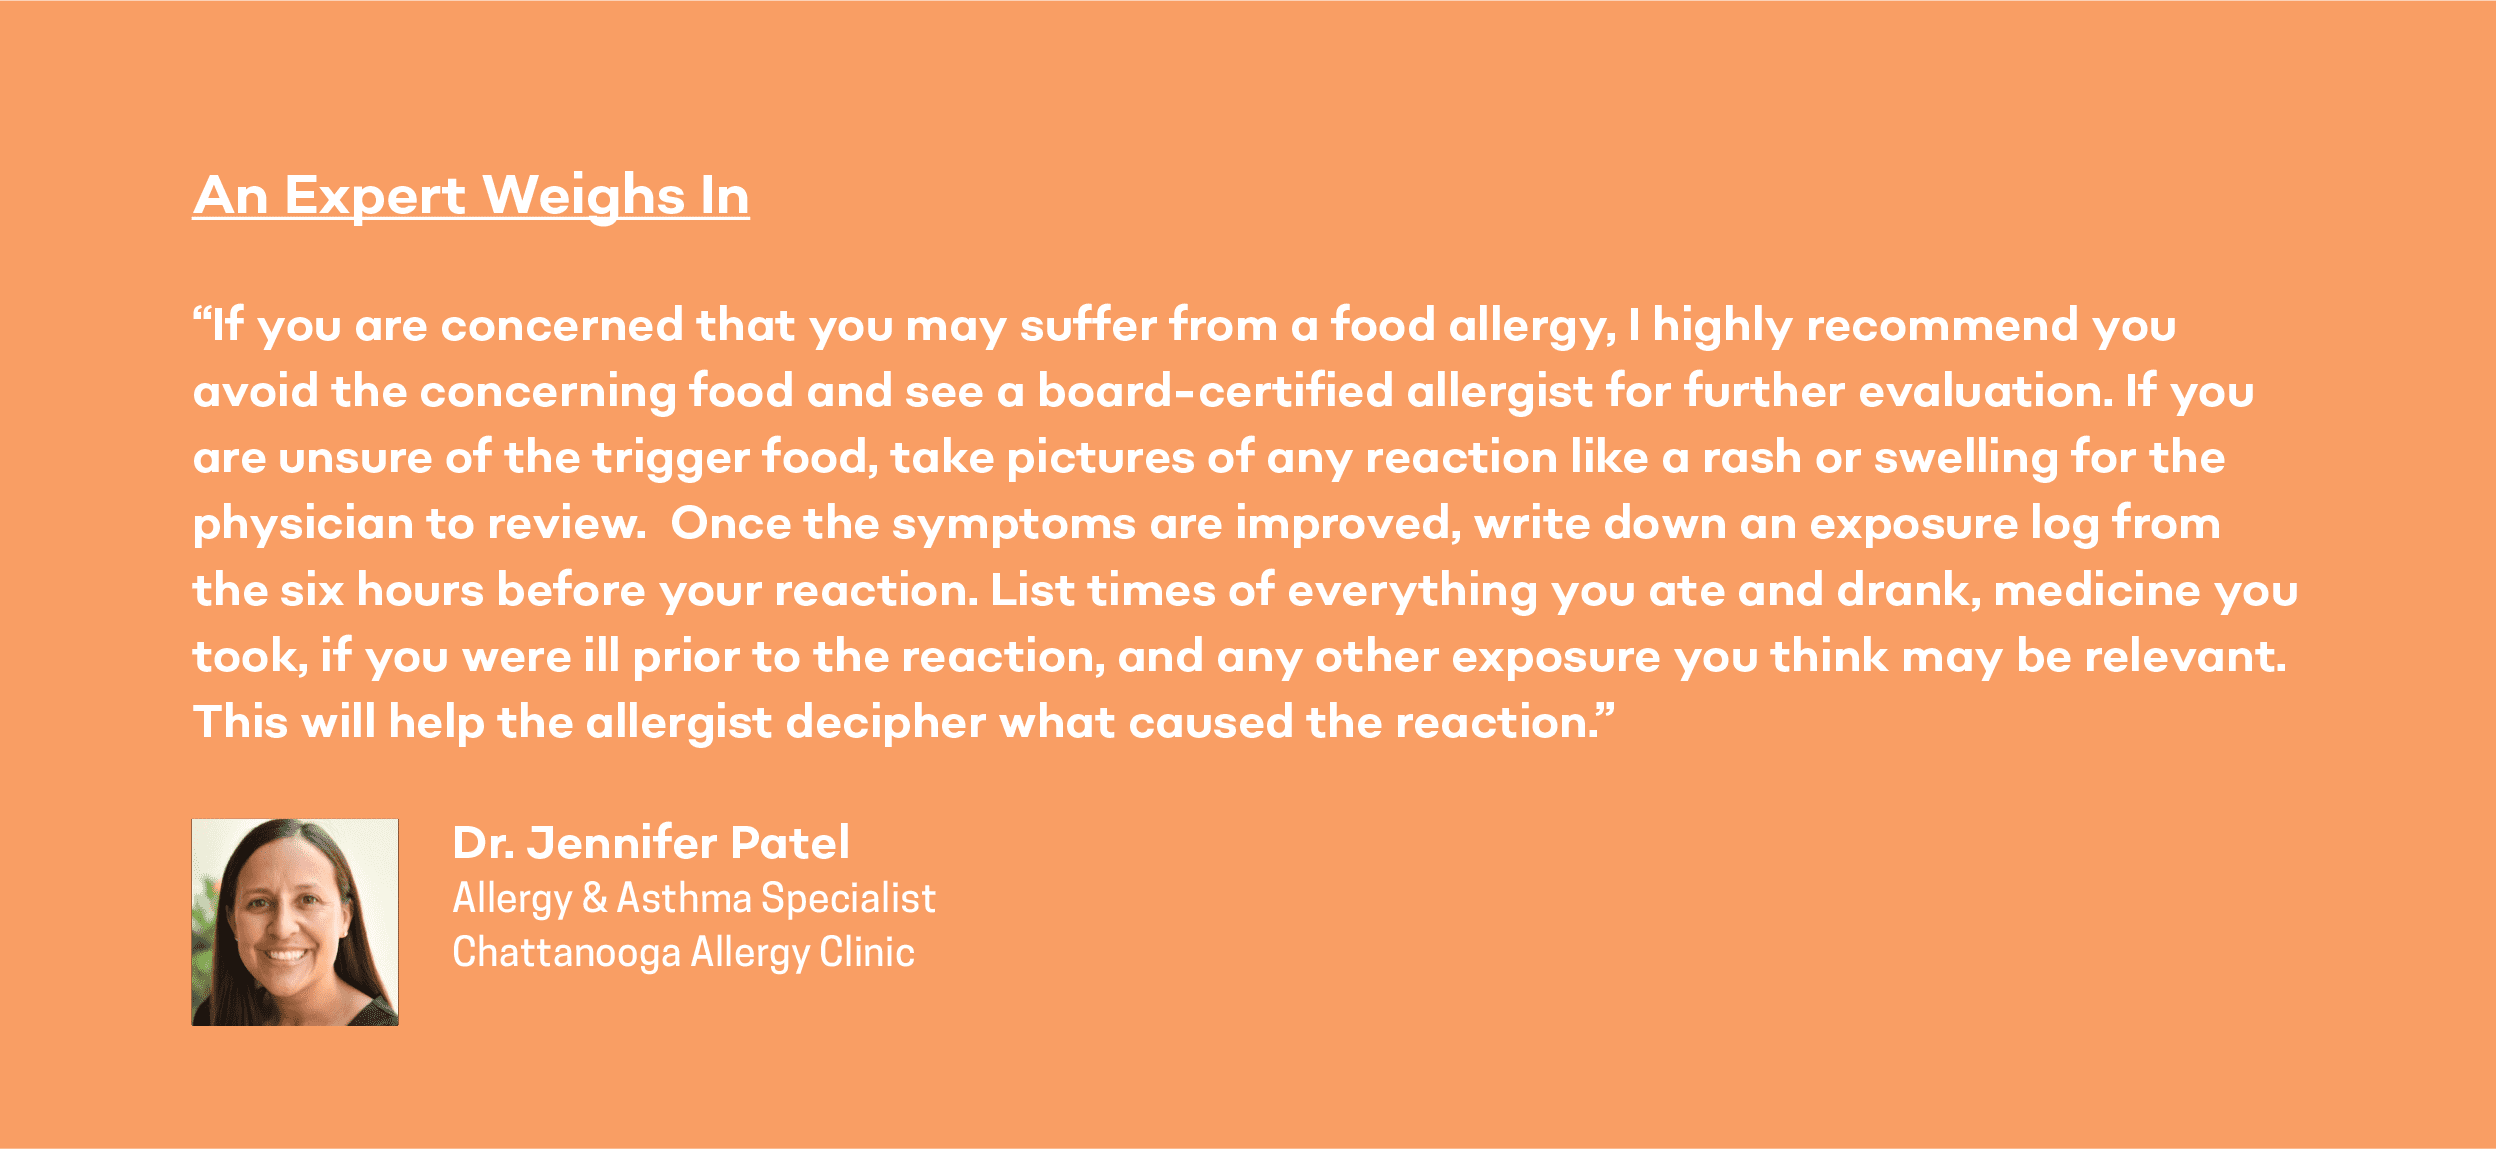 expert opinion on food allergies in chattanooga from dr. jennifer patel